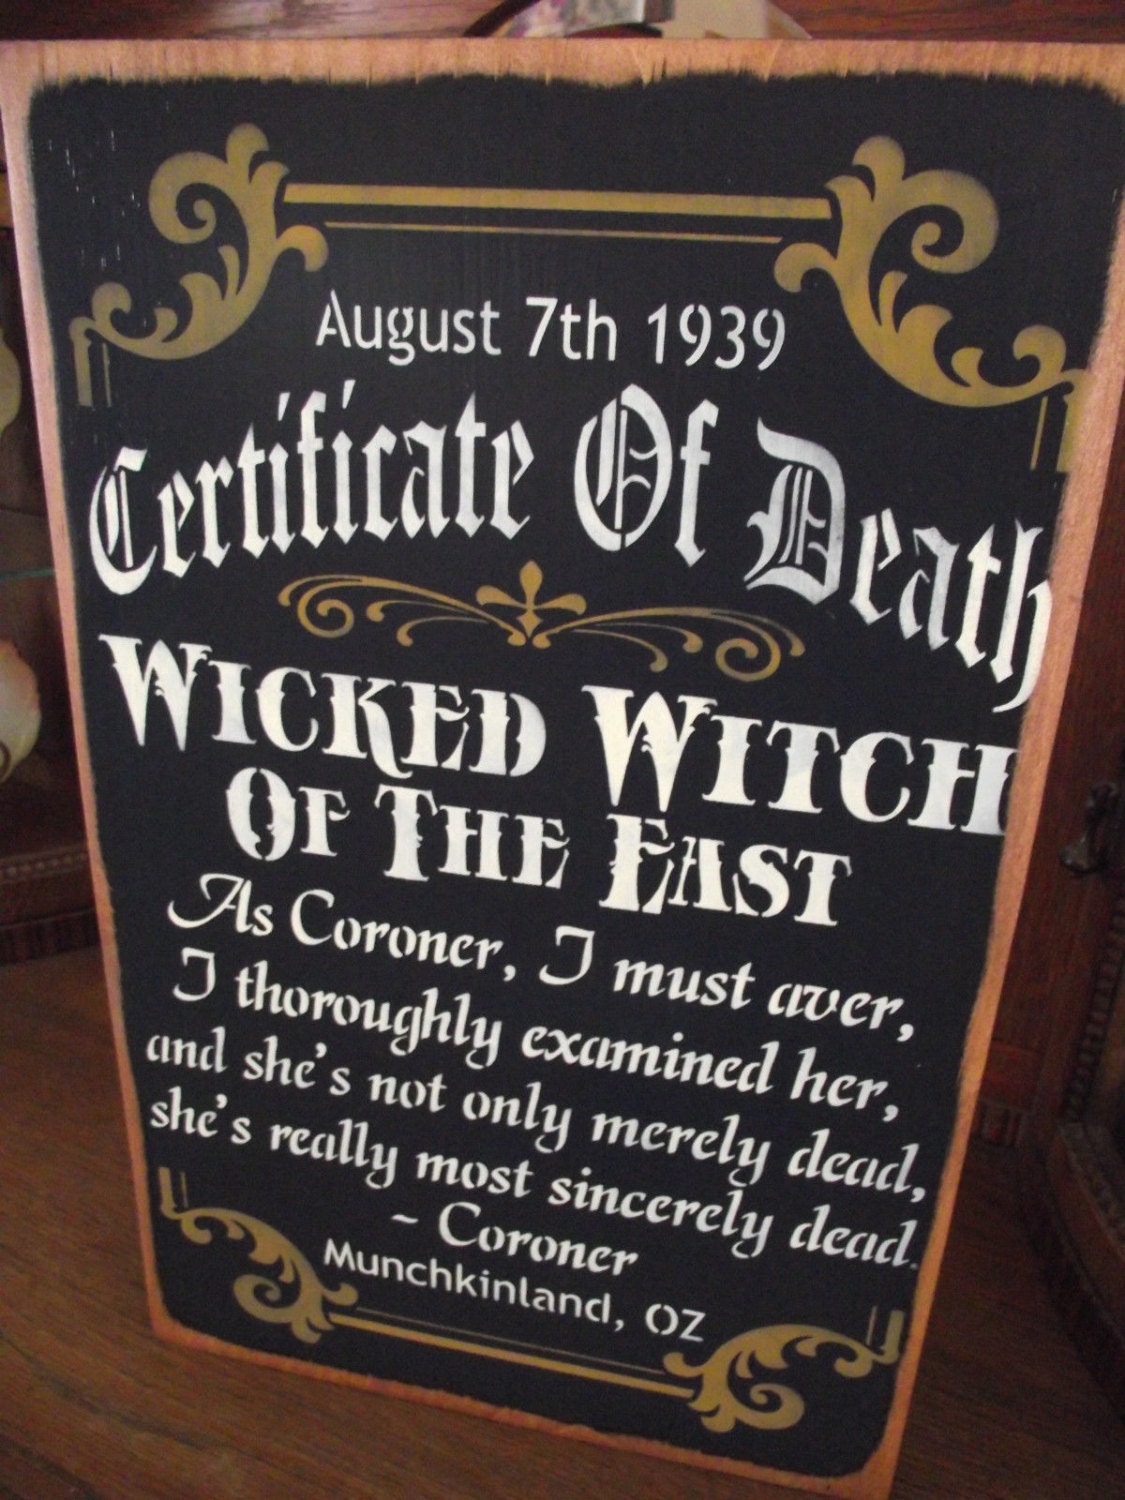 certificate-of-death-for-the-wicked-witch-of-the-east-etsy